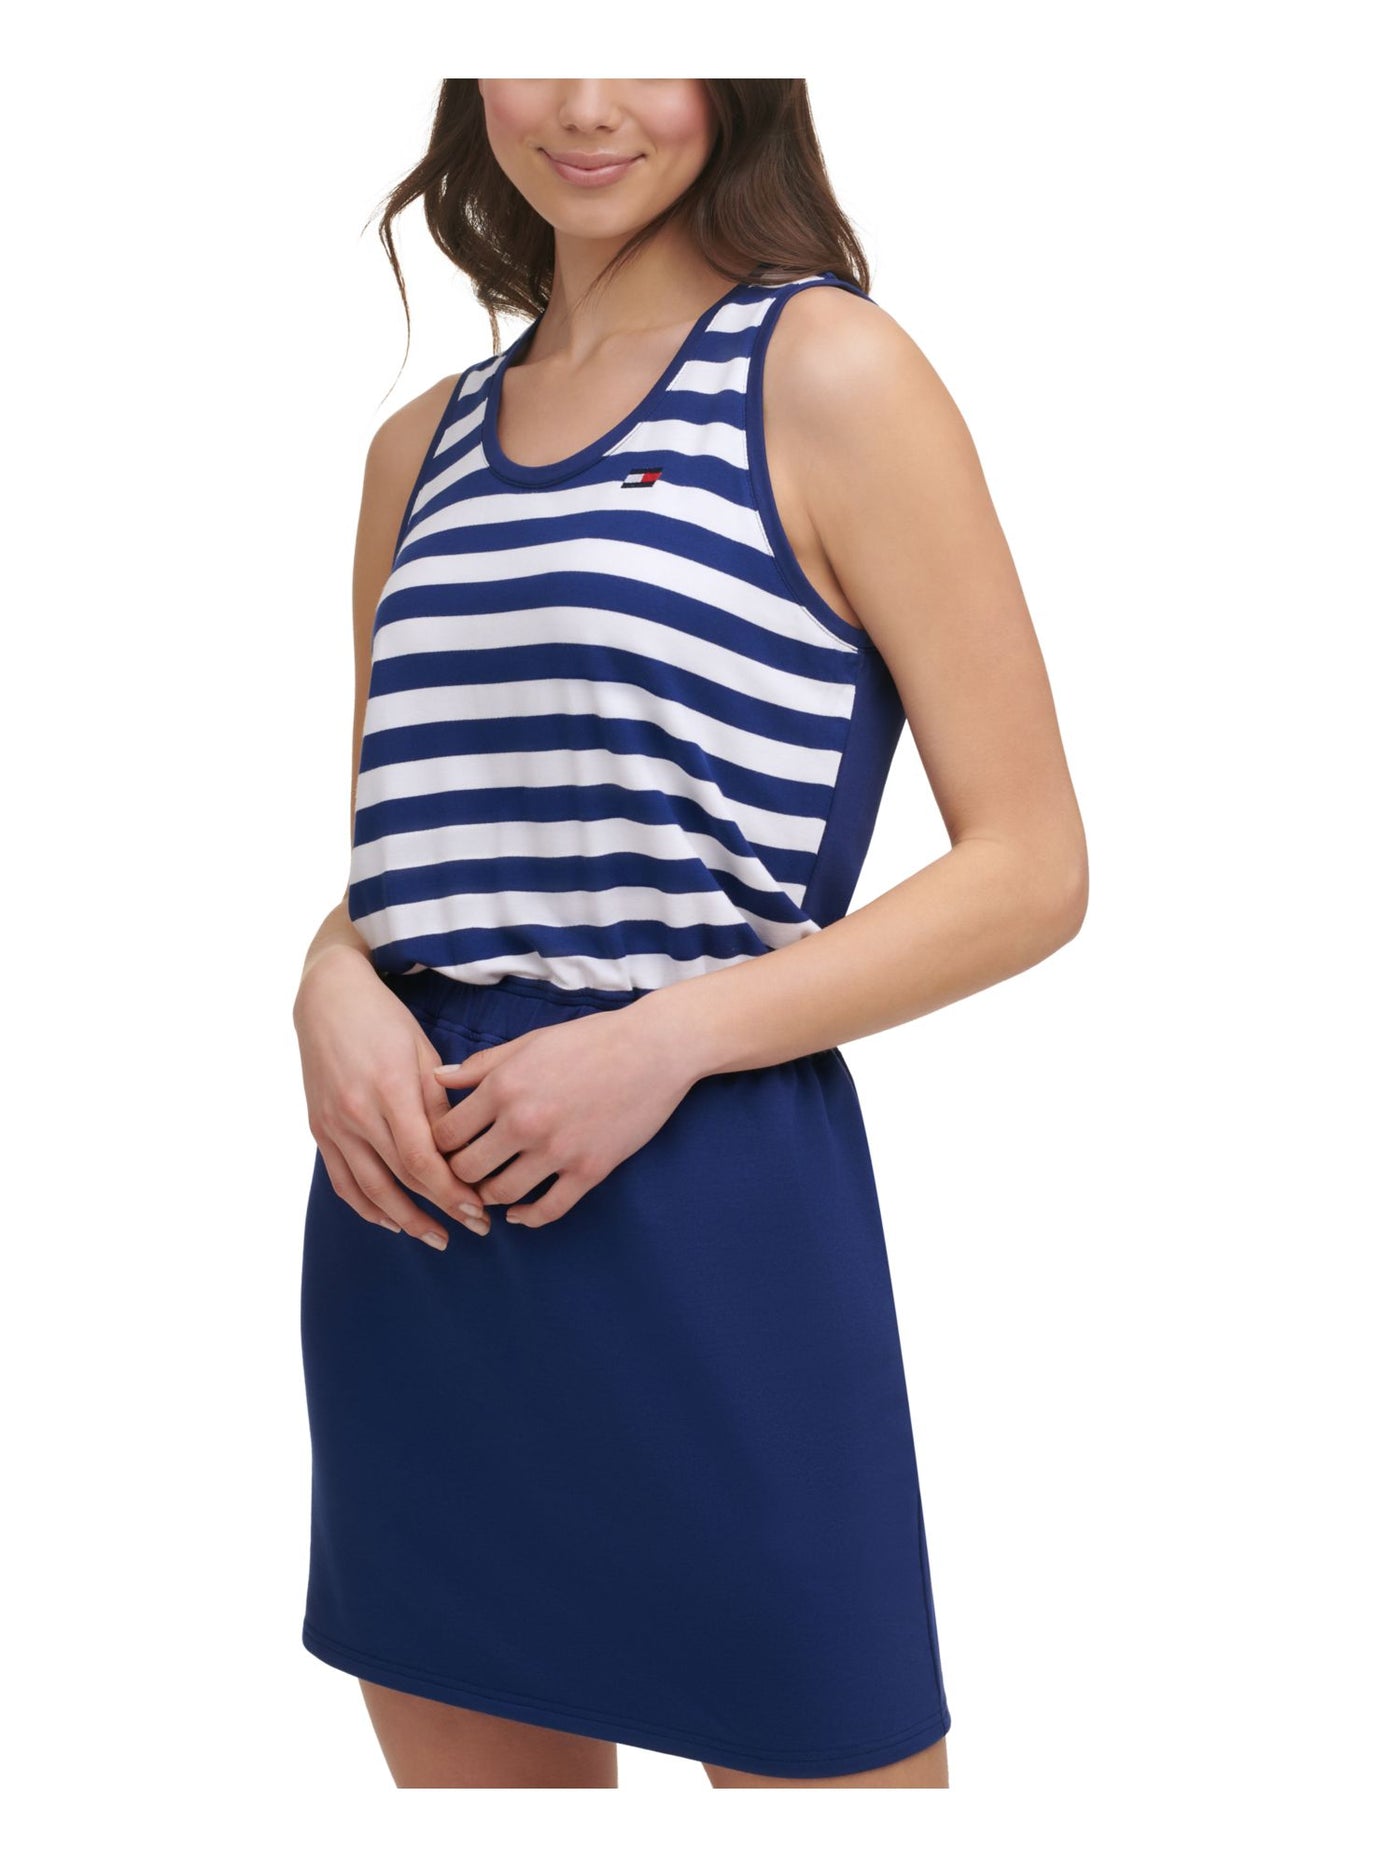 TOMMY HILFIGER SPORT Womens Blue Stretch Embroidered Terry Cinched-waist Striped Sleeveless Scoop Neck Short Sheath Dress S